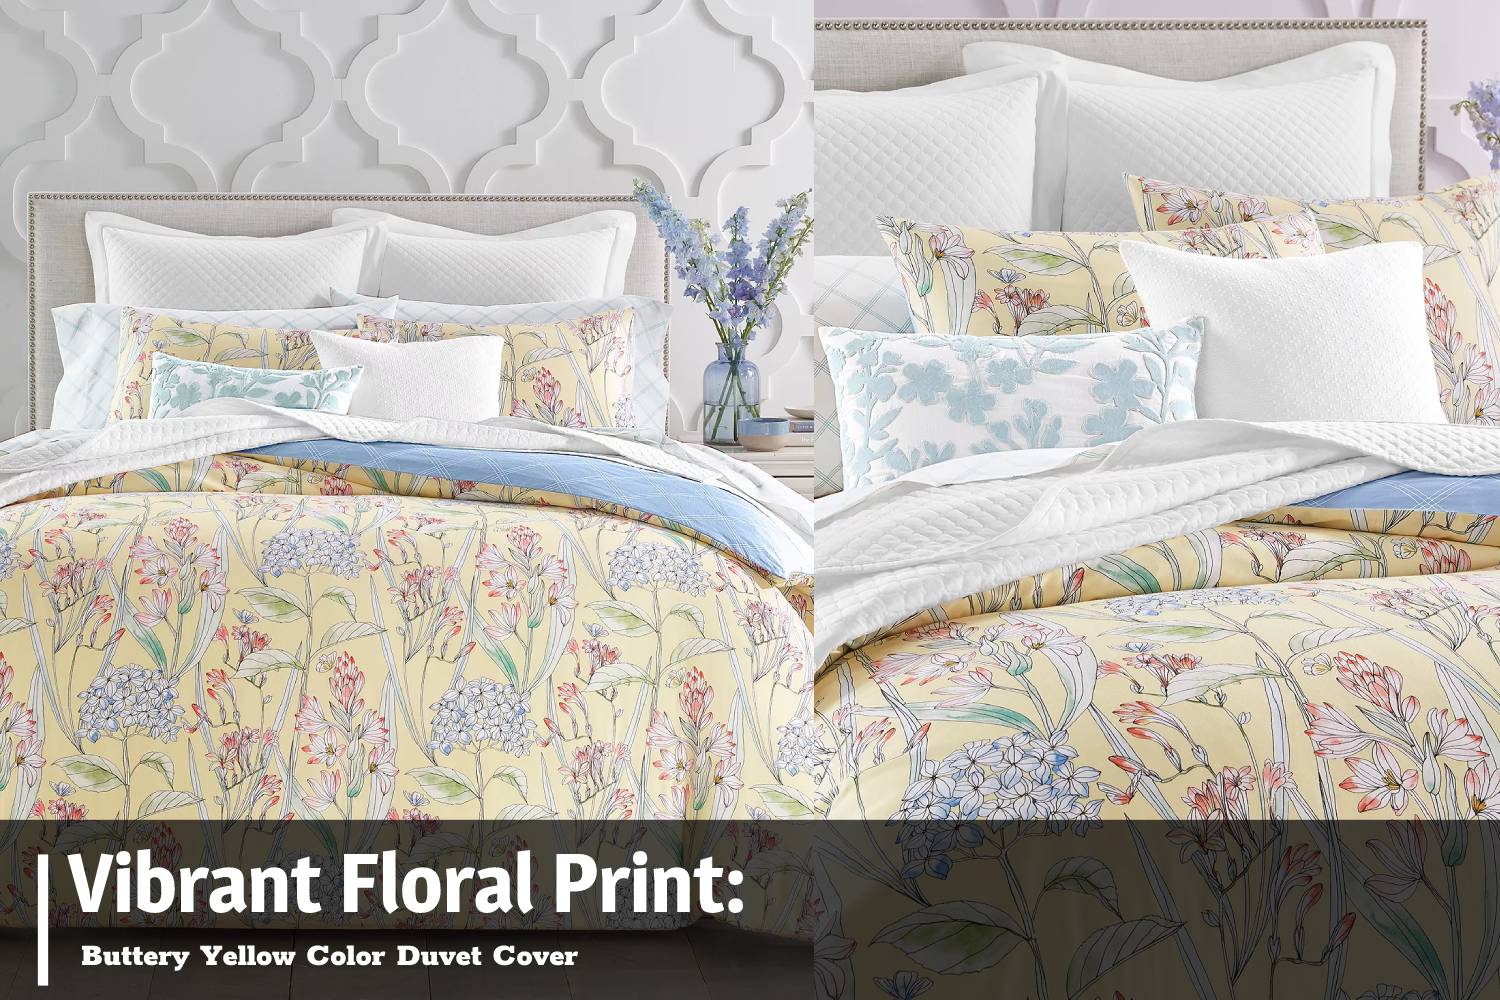 Vibrant floral print: Buttery yellow color duvet cover